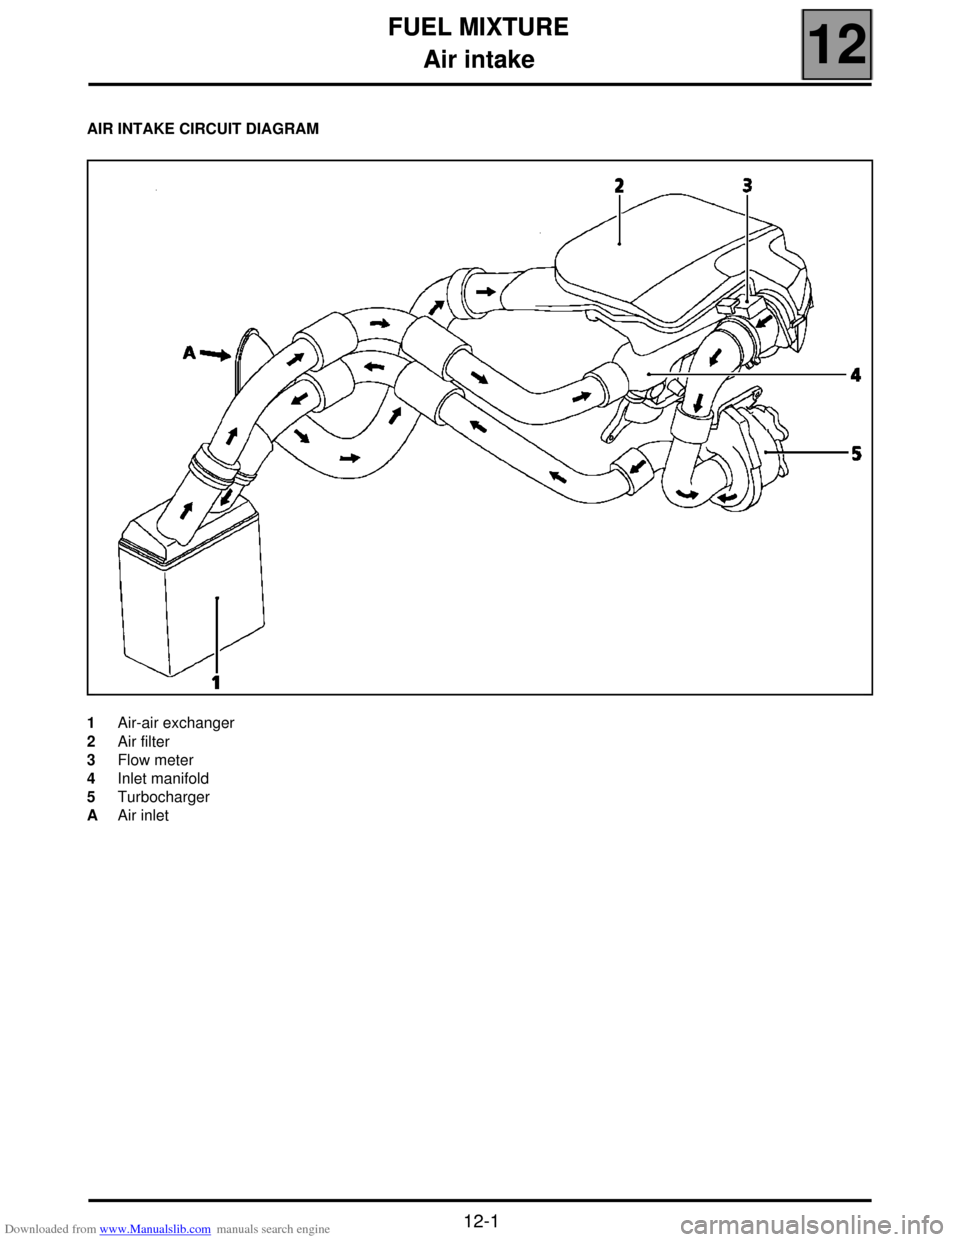 RENAULT SCENIC 2000 J64 / 1.G Technical Note 3426A Owners Guide Downloaded from www.Manualslib.com manuals search engine FUEL MIXTURE
Air intake
12
112
FUEL MIXTURE
Air intake
AIR INTAKE CIRCUIT DIAGRAM
1 Air-air exchanger
2 Air filter
3 Flow meter
4 Inlet manifol